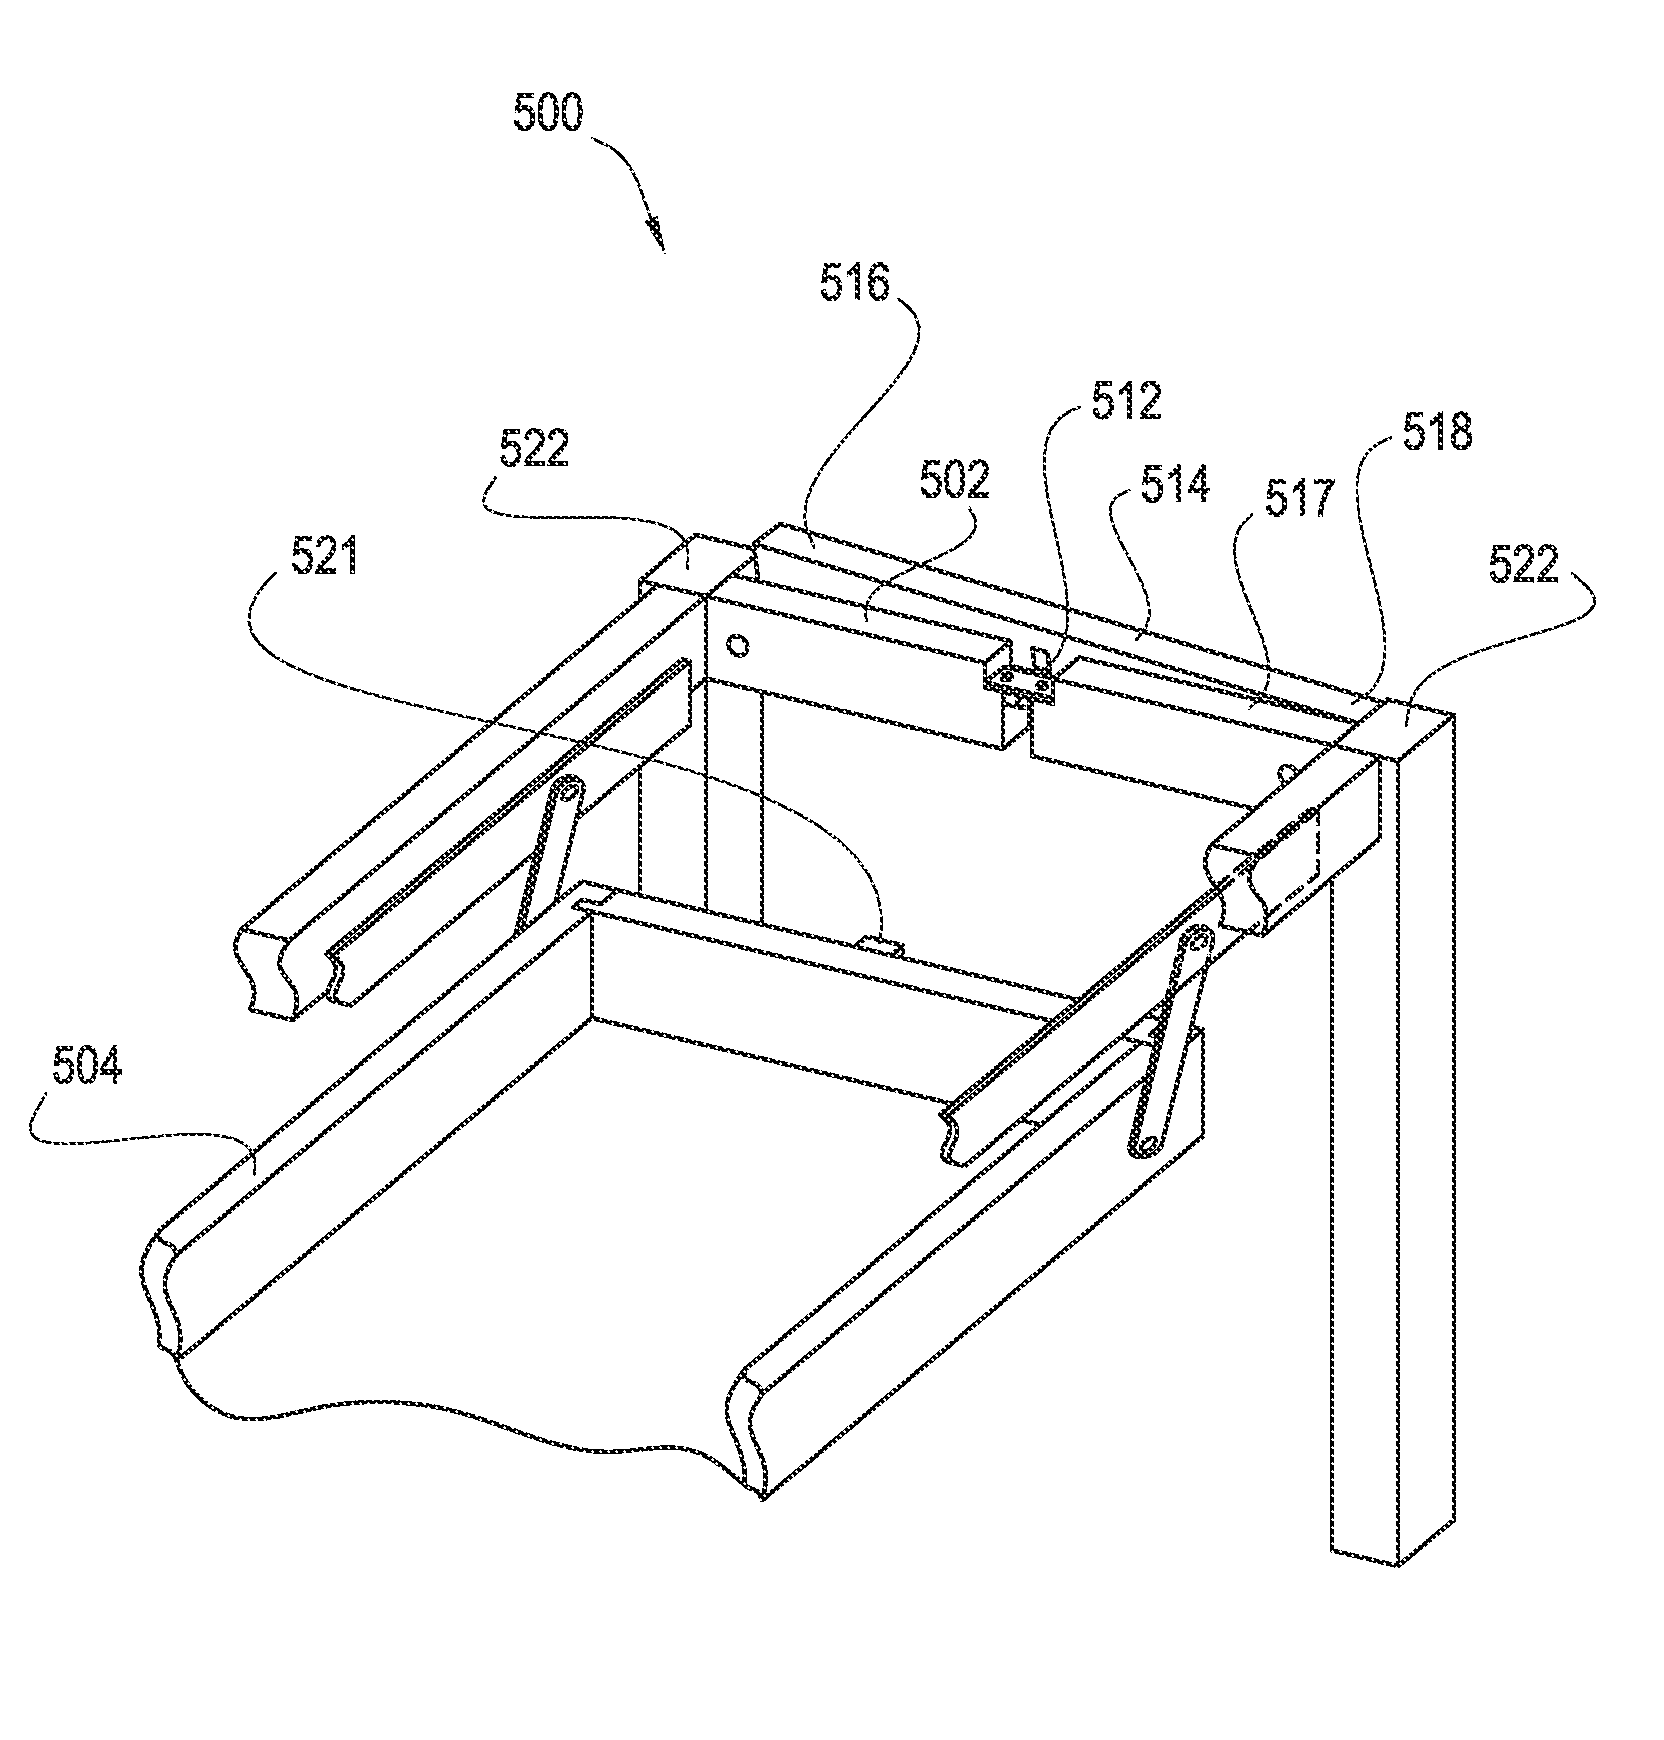 Apparatus for Concealing Household Objects